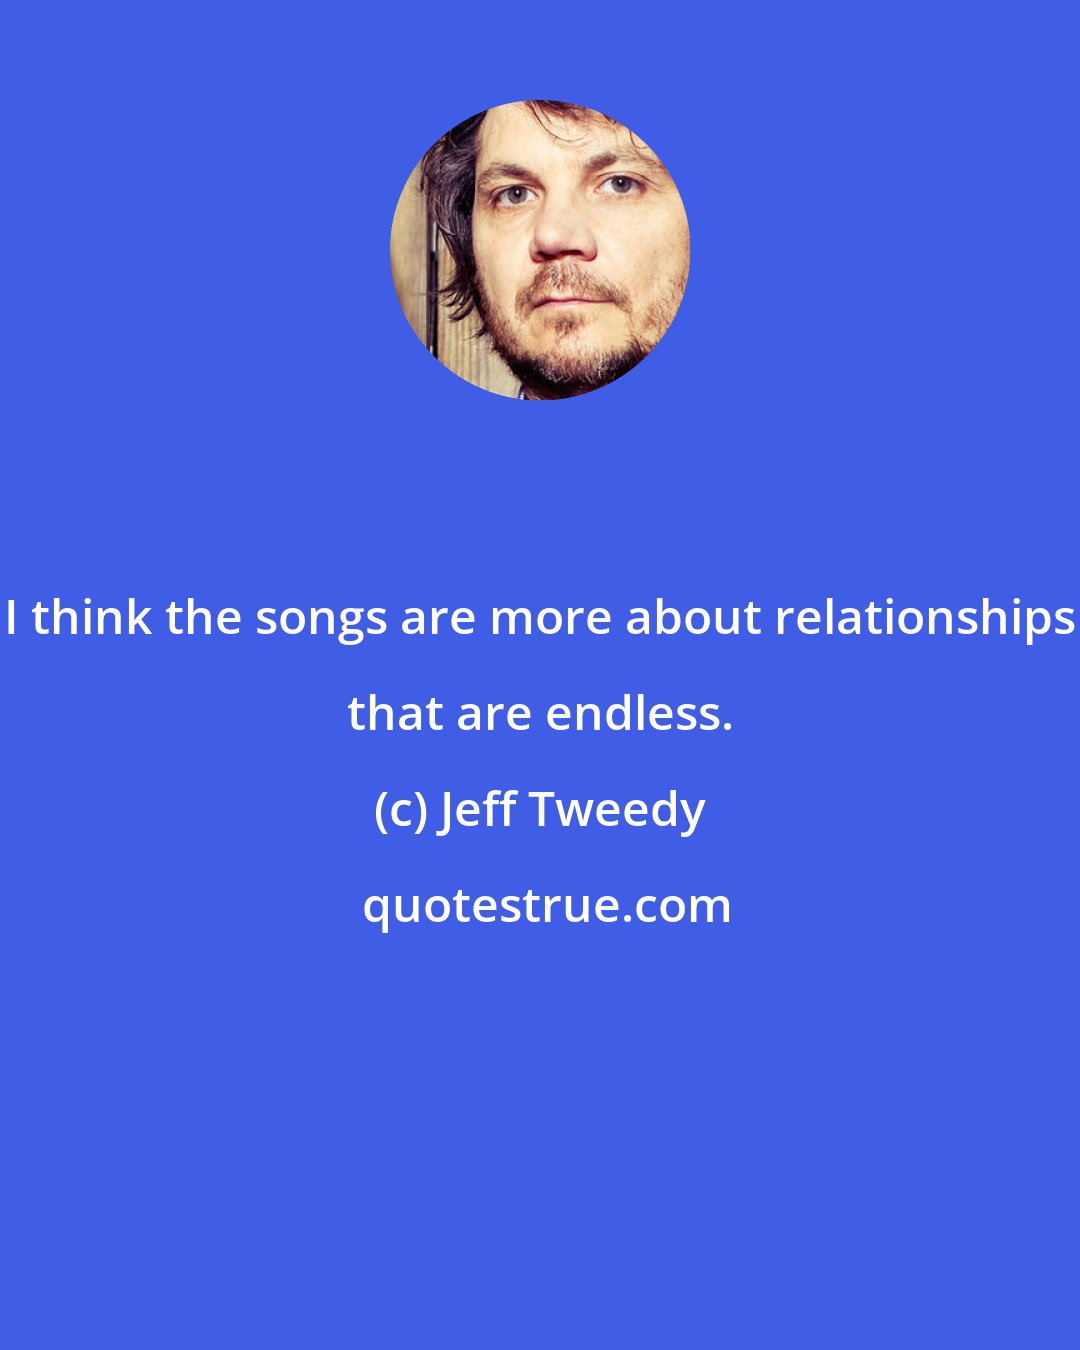 Jeff Tweedy: I think the songs are more about relationships that are endless.